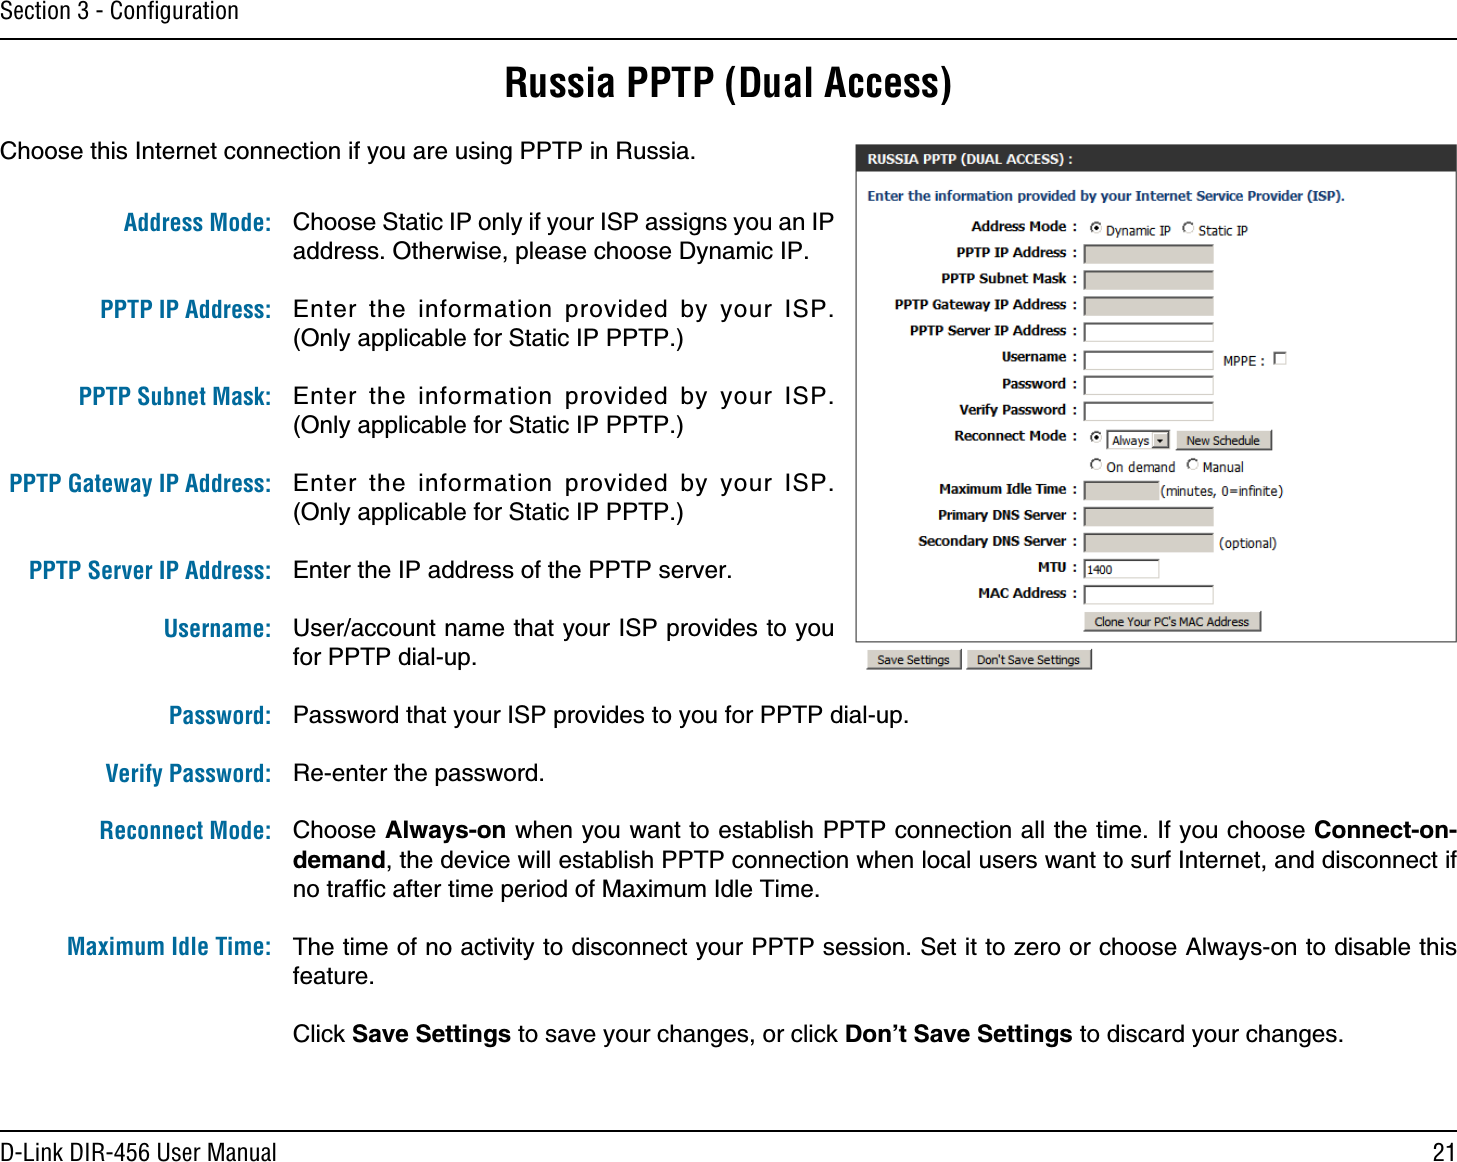 21D-Link DIR-456 User ManualSection 3 - ConﬁgurationRussia PPTP (Dual Access)Choose this Internet connection if you are using PPTP in Russia.Choose Static IP only if your ISP assigns you an IP address. Otherwise, please choose Dynamic IP.Enter the information provided by your ISP. (Only applicable for Static IP PPTP.)Enter the information provided by your ISP. (Only applicable for Static IP PPTP.)Enter the information provided by your ISP. (Only applicable for Static IP PPTP.)Enter the IP address of the PPTP server.User/account name that your ISP provides to you for PPTP dial-up.Password that your ISP provides to you for PPTP dial-up.Re-enter the password.Choose Always-on when you want to establish PPTP connection all the time. If you choose Connect-on-demand, the device will establish PPTP connection when local users want to surf Internet, and disconnect if no trafﬁc after time period of Maximum Idle Time.The time of no activity to disconnect your PPTP session. Set it to zero or choose Always-on to disable this feature.Click Save Settings to save your changes, or click Don’t Save Settings to discard your changes.Address Mode: PPTP IP Address: PPTP Subnet Mask: PPTP Gateway IP Address: PPTP Server IP Address:Username: Password:Verify Password:Reconnect Mode:Maximum Idle Time: